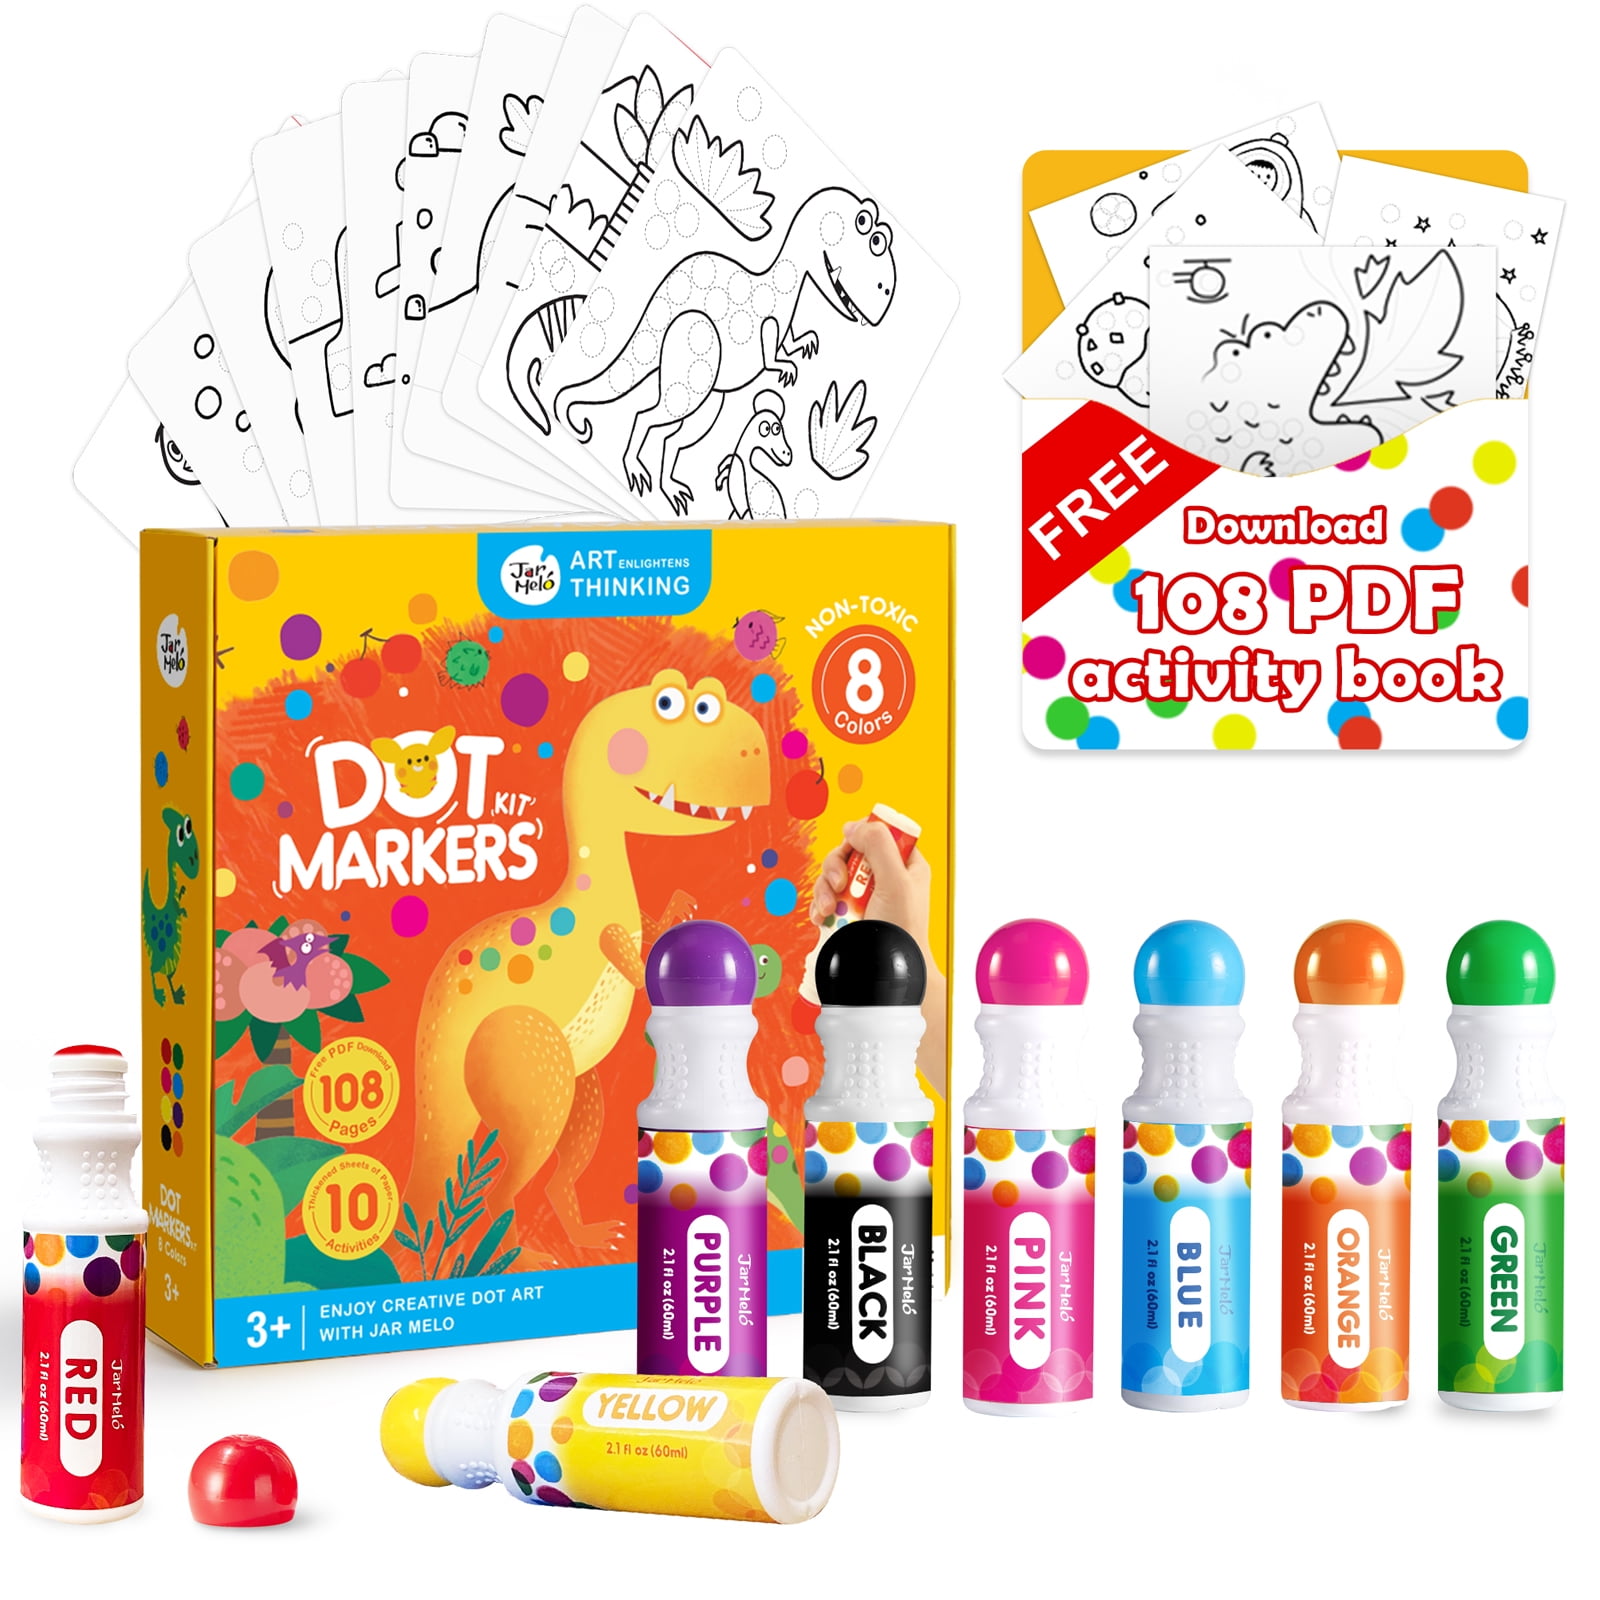 Jar Melo Washable Dot Markers Kit for Kids 3-8+ Age,8 Colors Non Toxic Dot  Paint Markers with 108 Free Pdf Activity Book & Physical Sheets 2.1 fl.oz  Bingo Daubers for Toddlers School